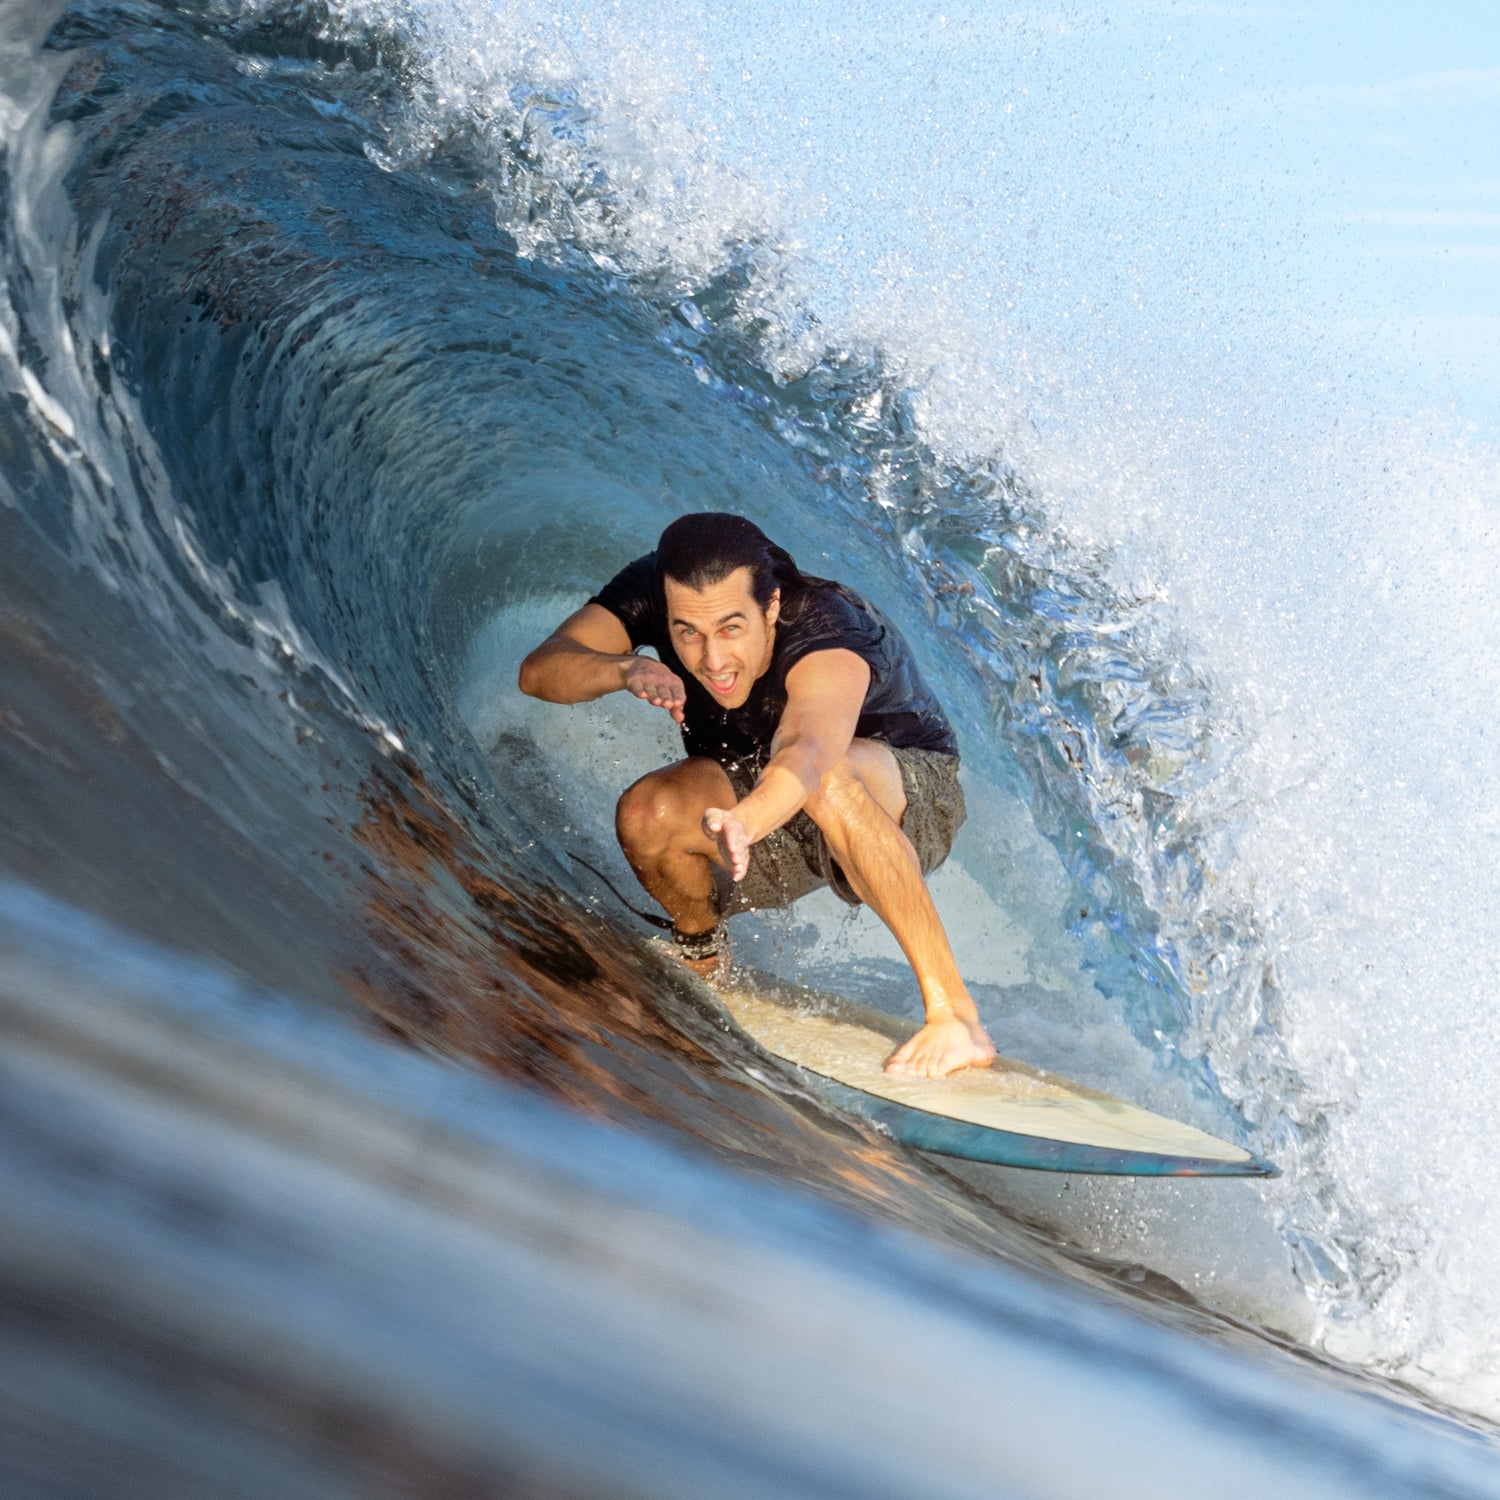 Man riding wave in curl. 